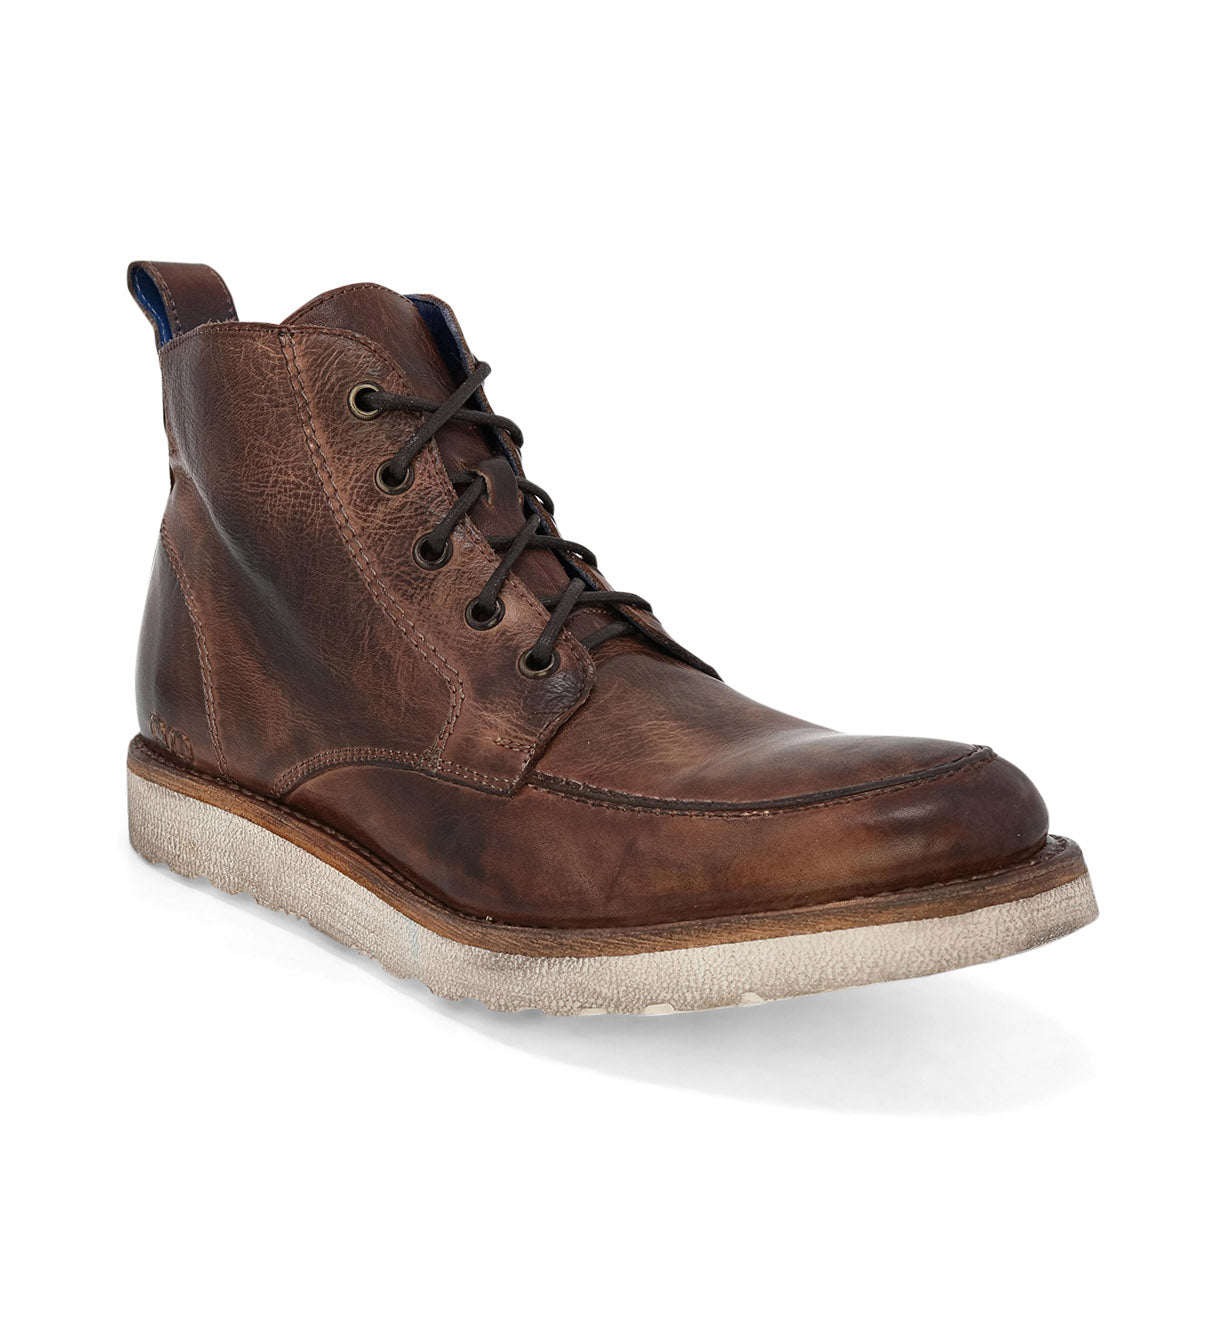 A brown leather lace-up work boot with a white sole, shown against a white background from the Bed Stu Lincoln collection.